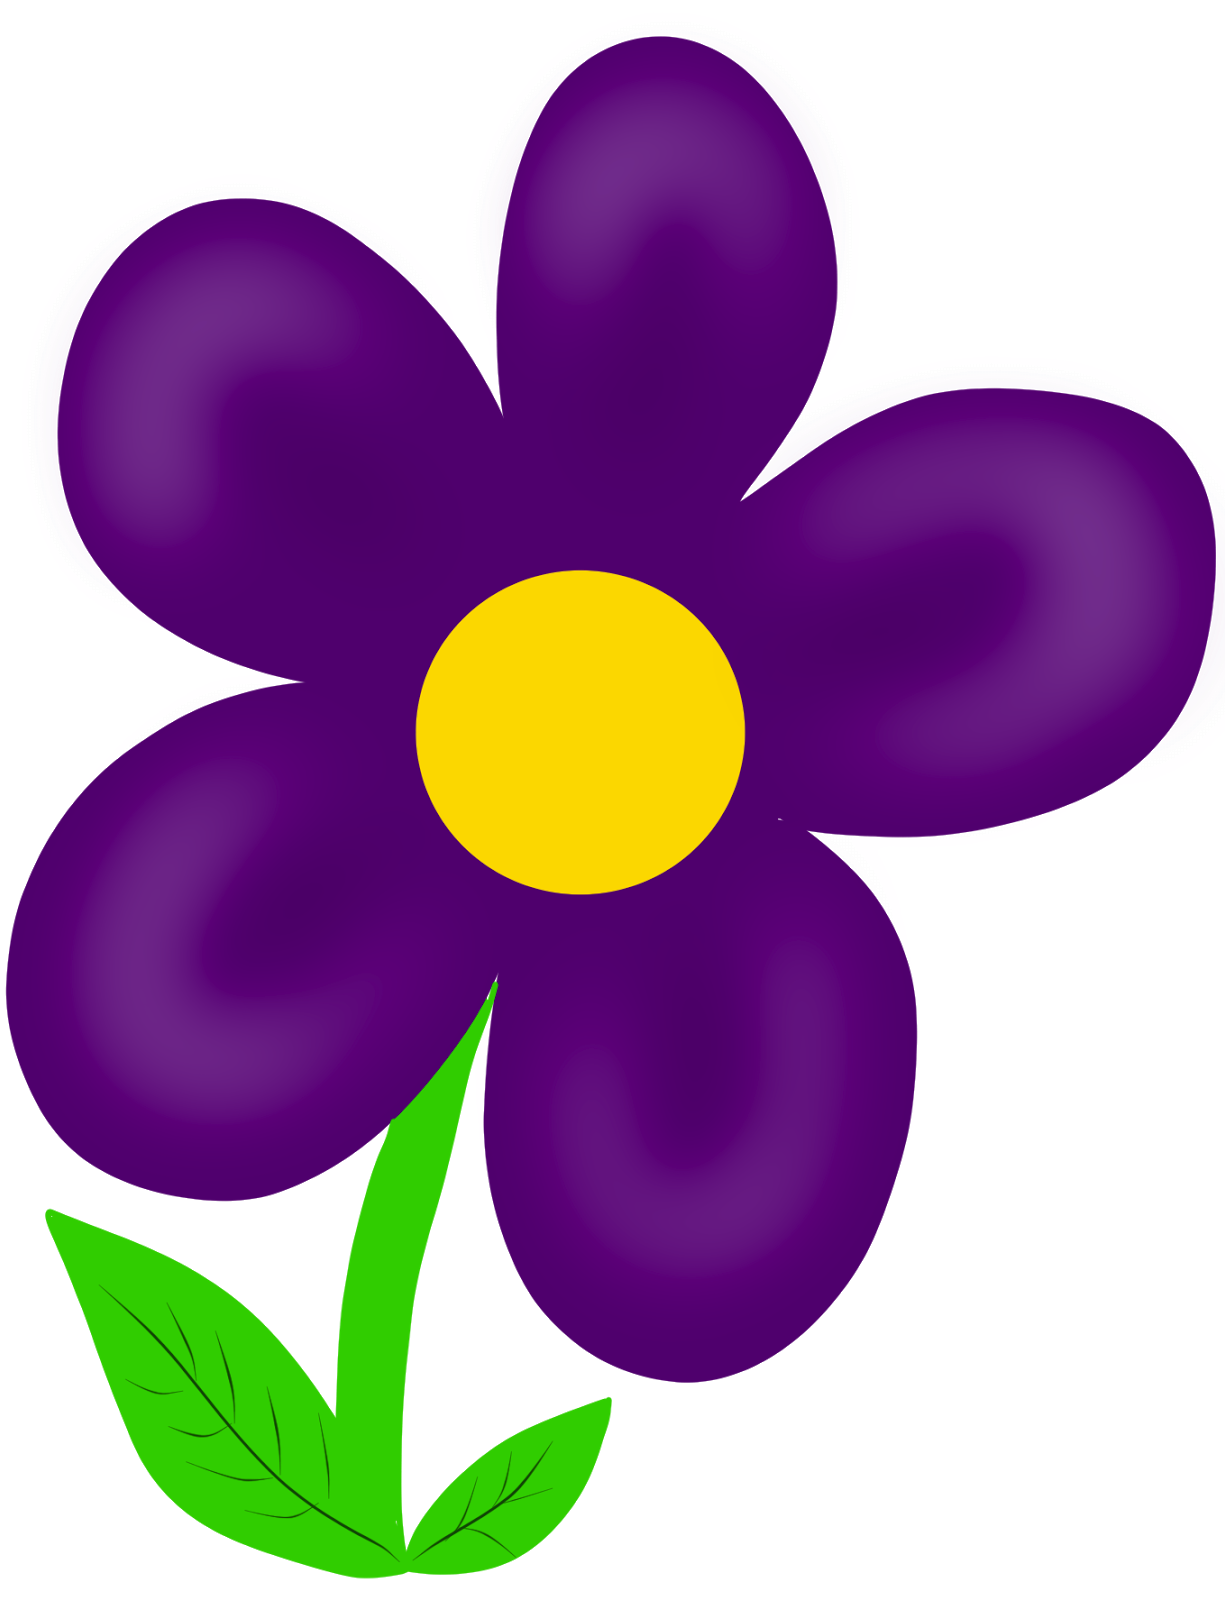 Free Cute Flower Clipart, Download Free Clip Art, Free ...